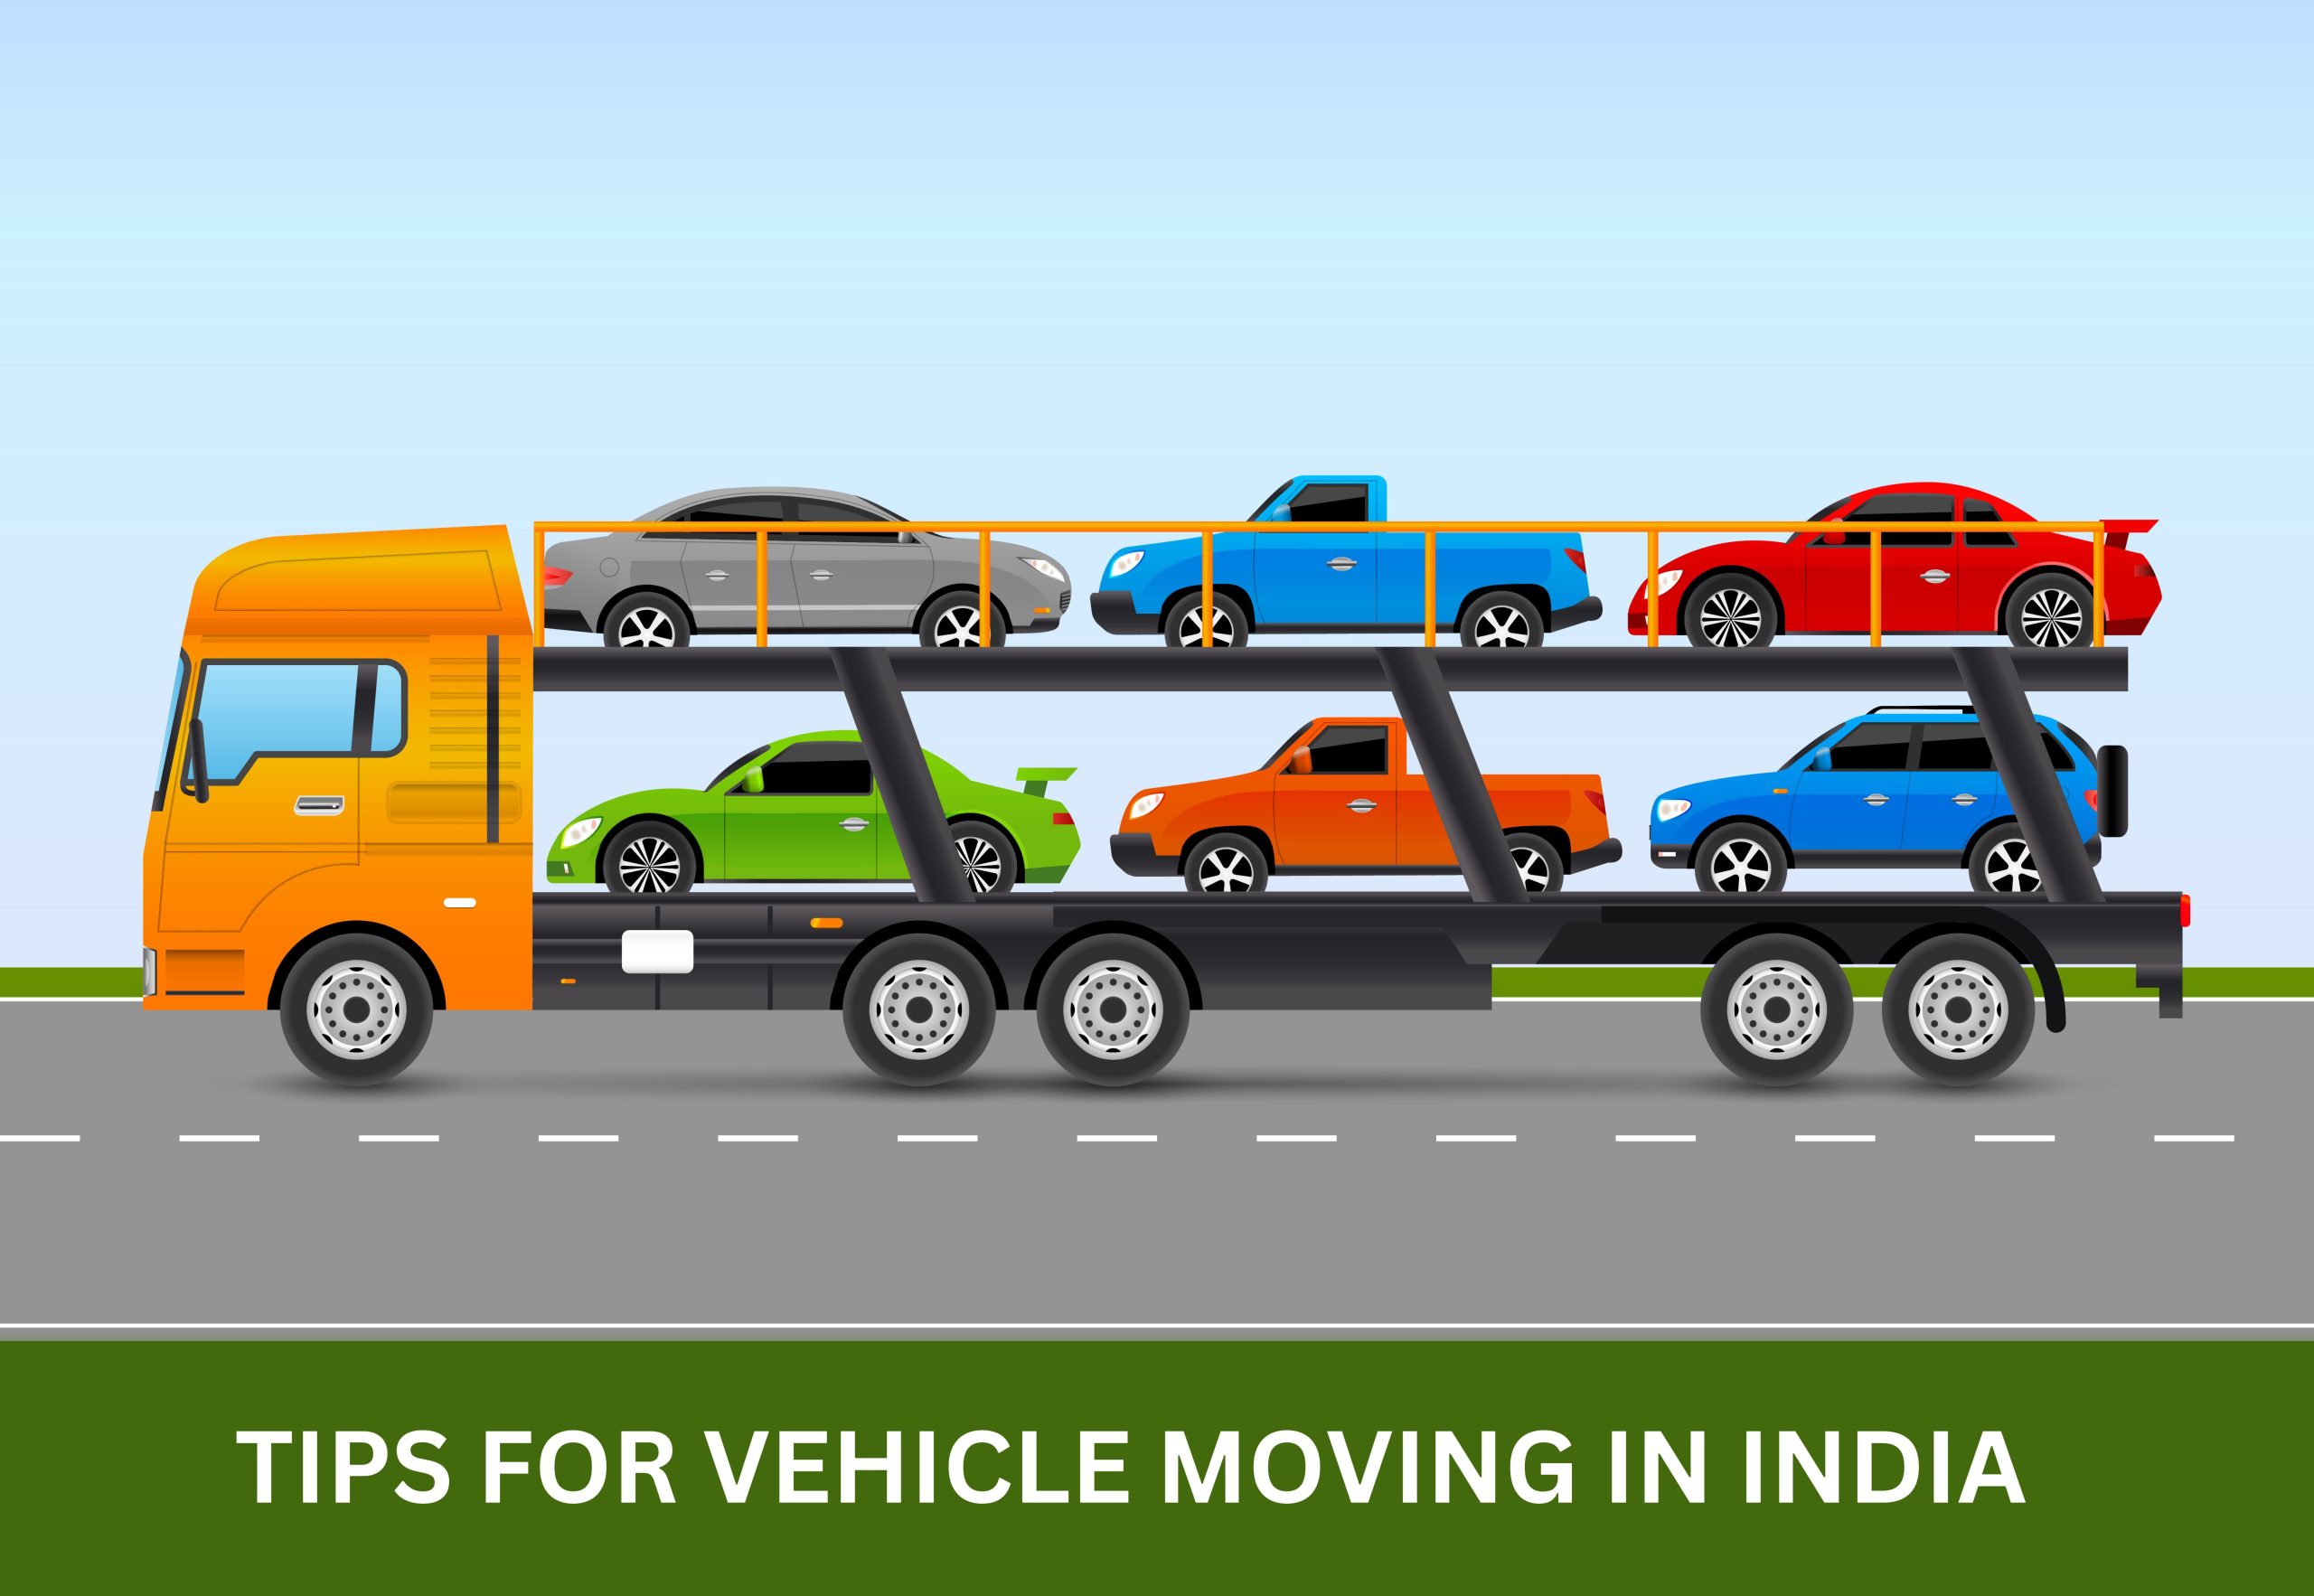 A comprehensive guide on best practices for vehicle moving in India, covering loading and unloading strategies to ensure a smooth transportation experience.